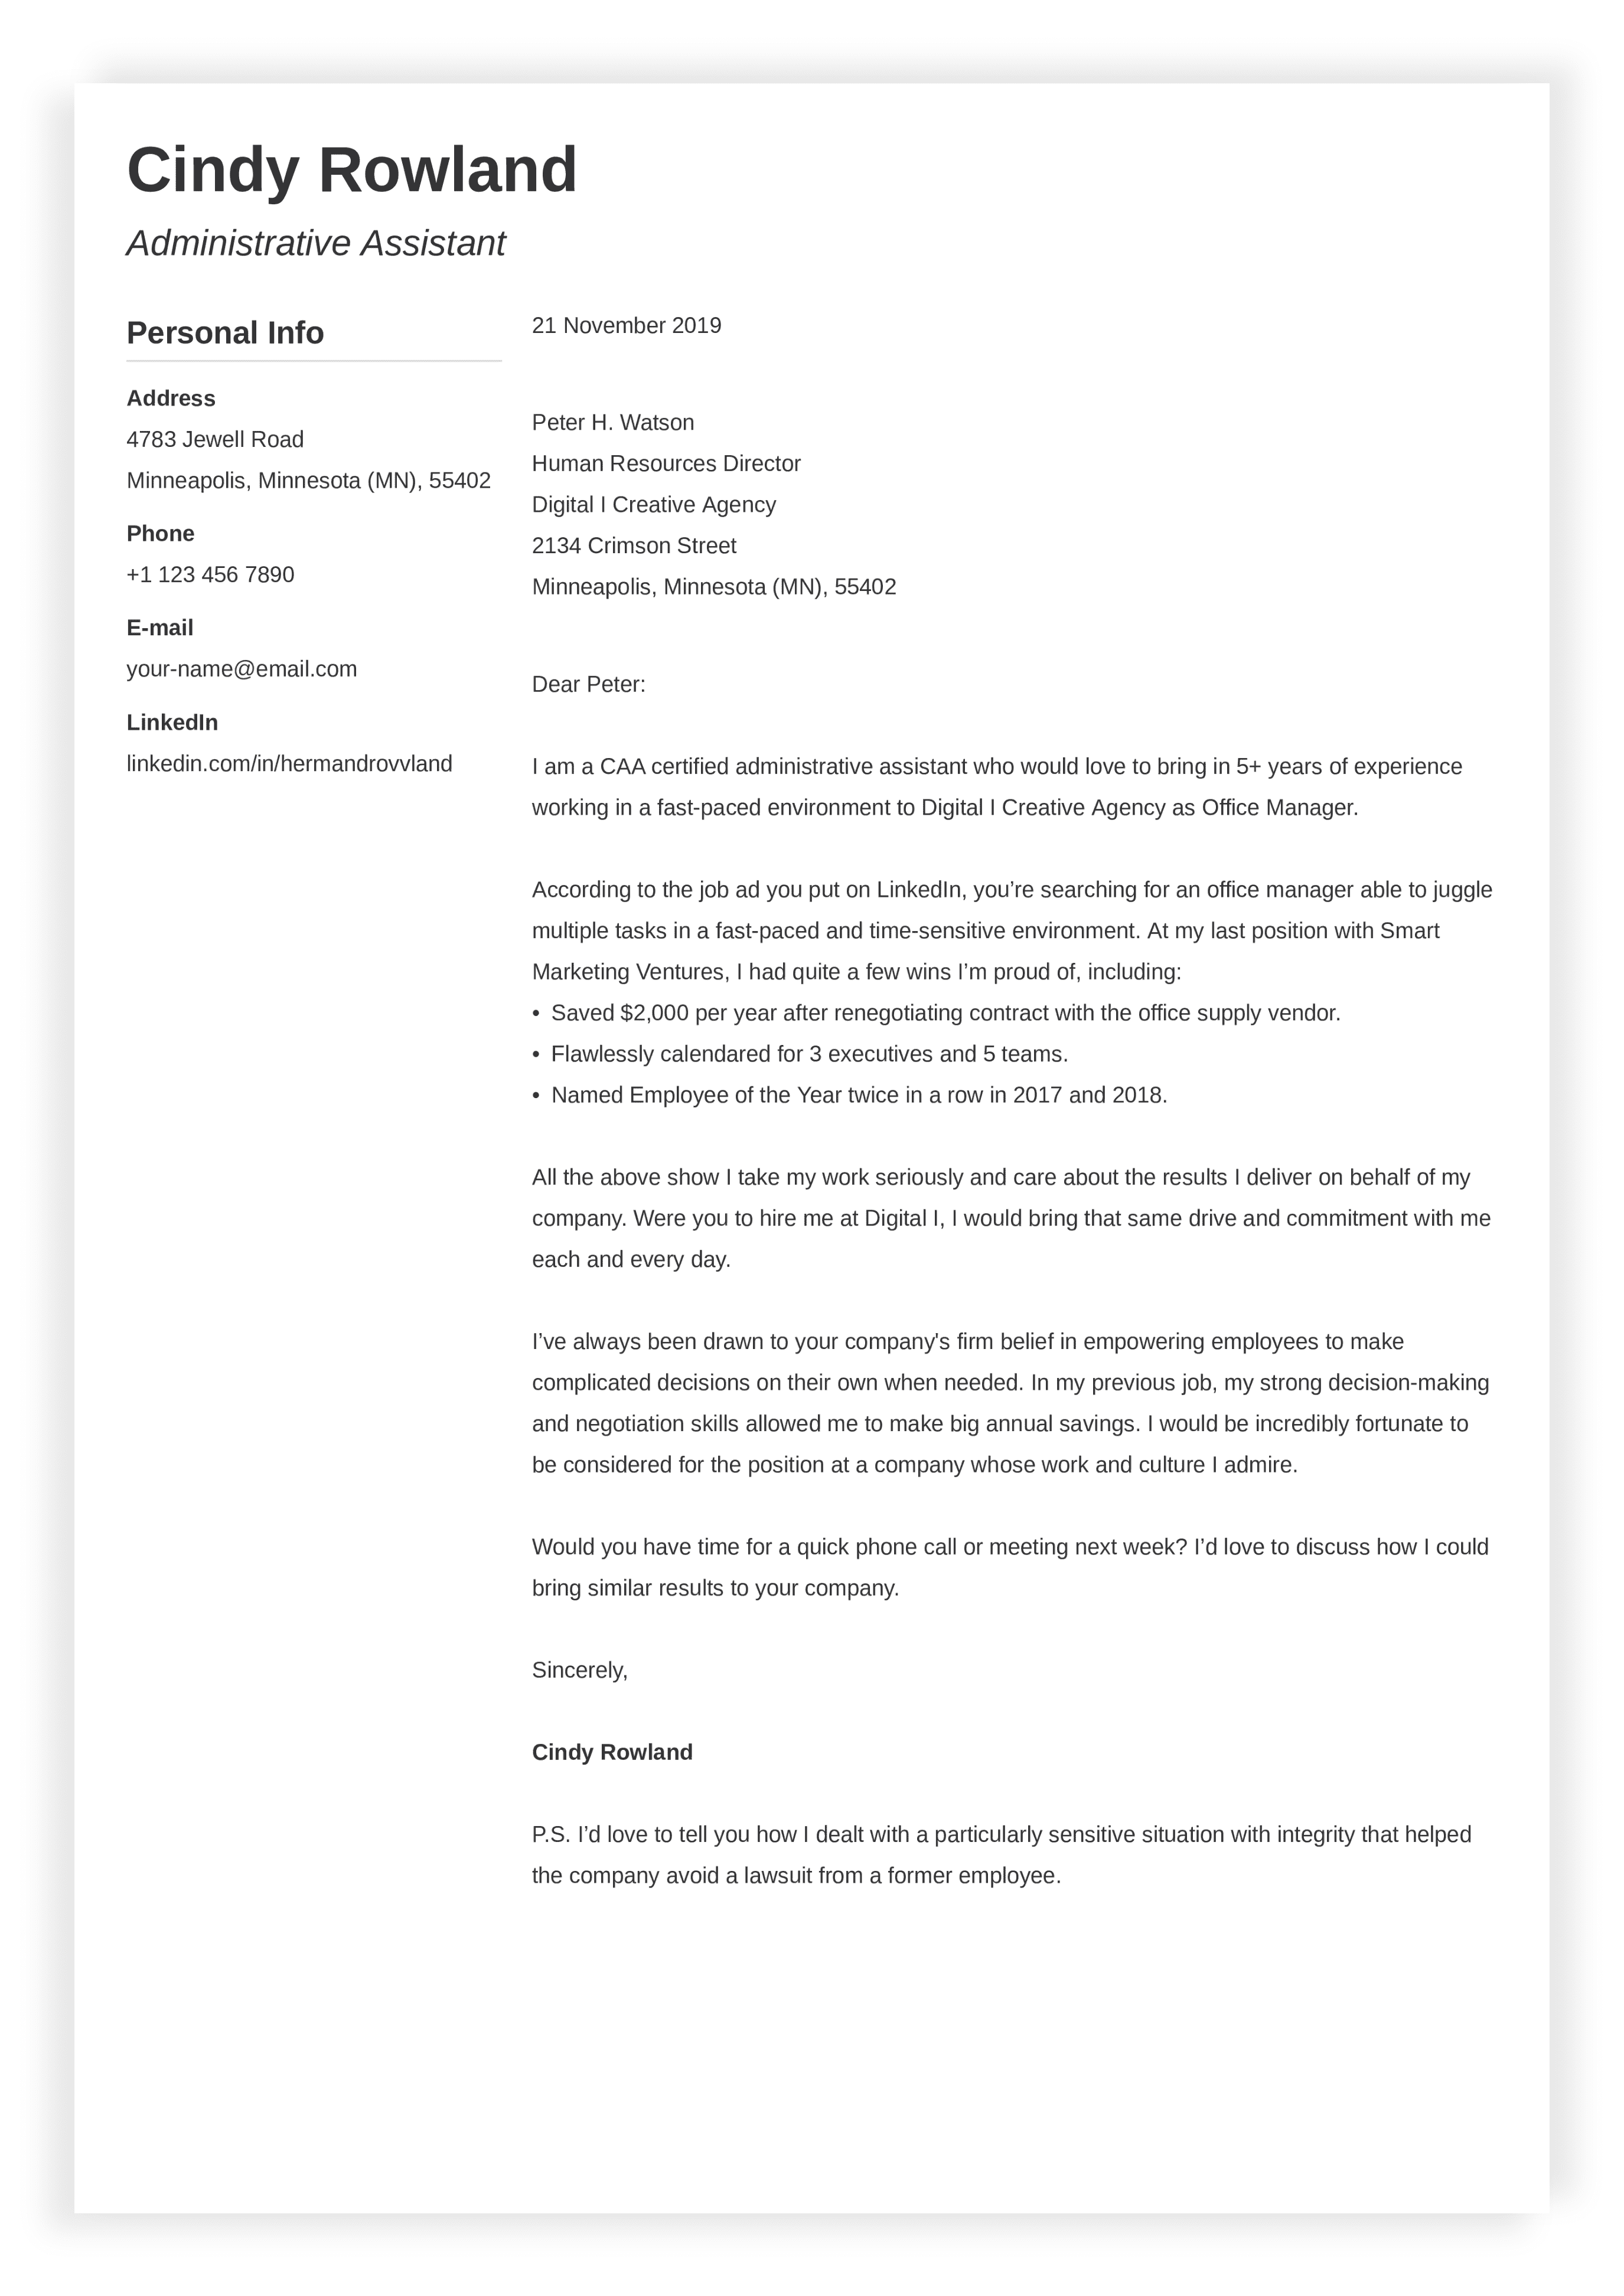 Cover Letter To Get The Job from cdn-images.zety.com